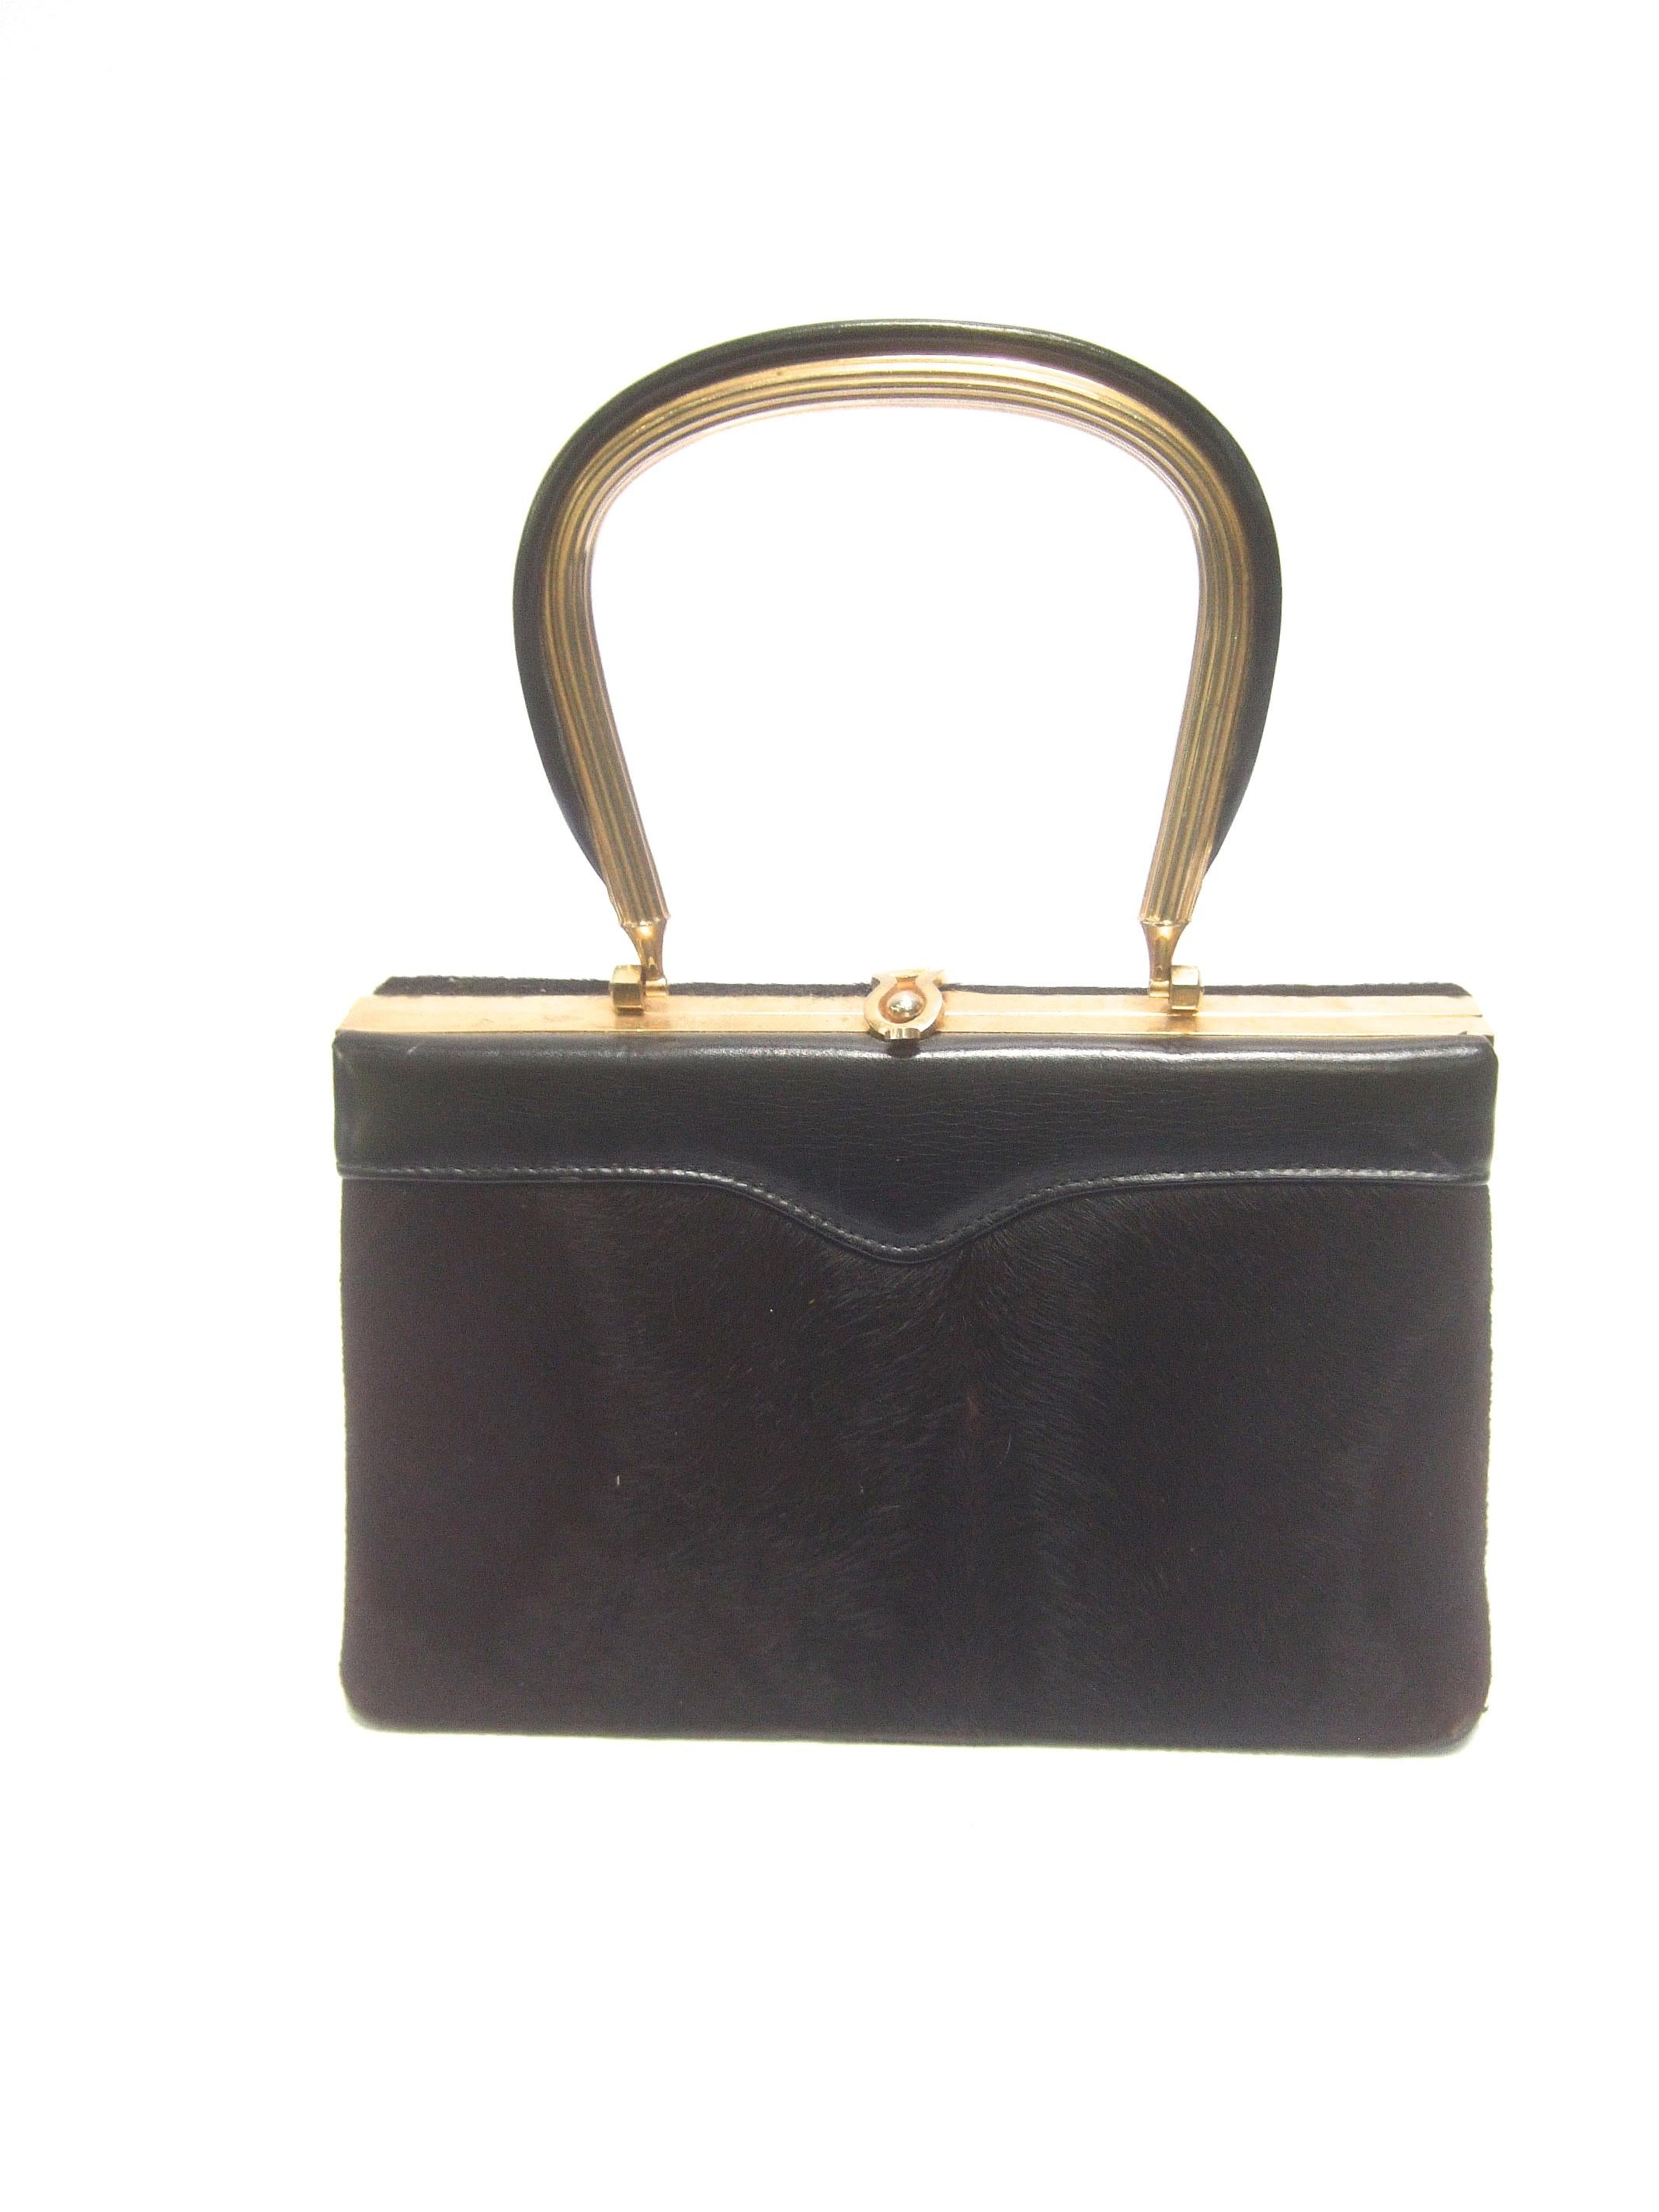 Diminutive chocolate brown pony fur handbag c 1970
The charming small size handbag is covered 
with dark brown pony fur on the front exterior

Running across the front upper section of the 
handbag is a black leather panel. The gilt metal
swivel